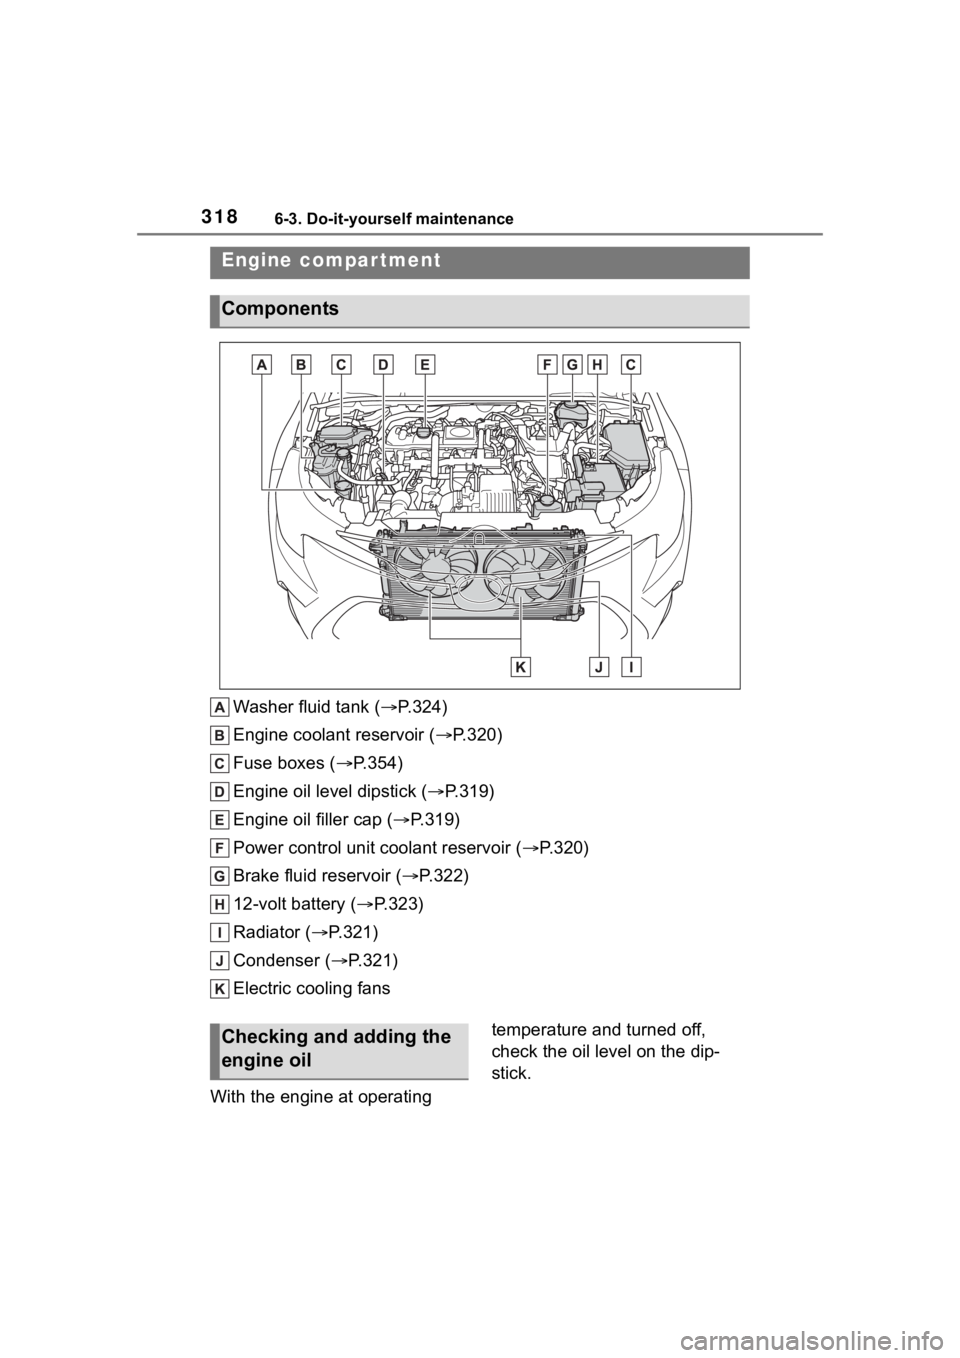 TOYOTA COROLLA HYBRID 2023  Owners Manual 3186-3. Do-it-yourself maintenance
Washer fluid tank ( P.324)
Engine coolant reservoir ( P.320)
Fuse boxes ( P.354)
Engine oil level dipstick ( P.319)
Engine oil filler cap ( P.319)
Pow